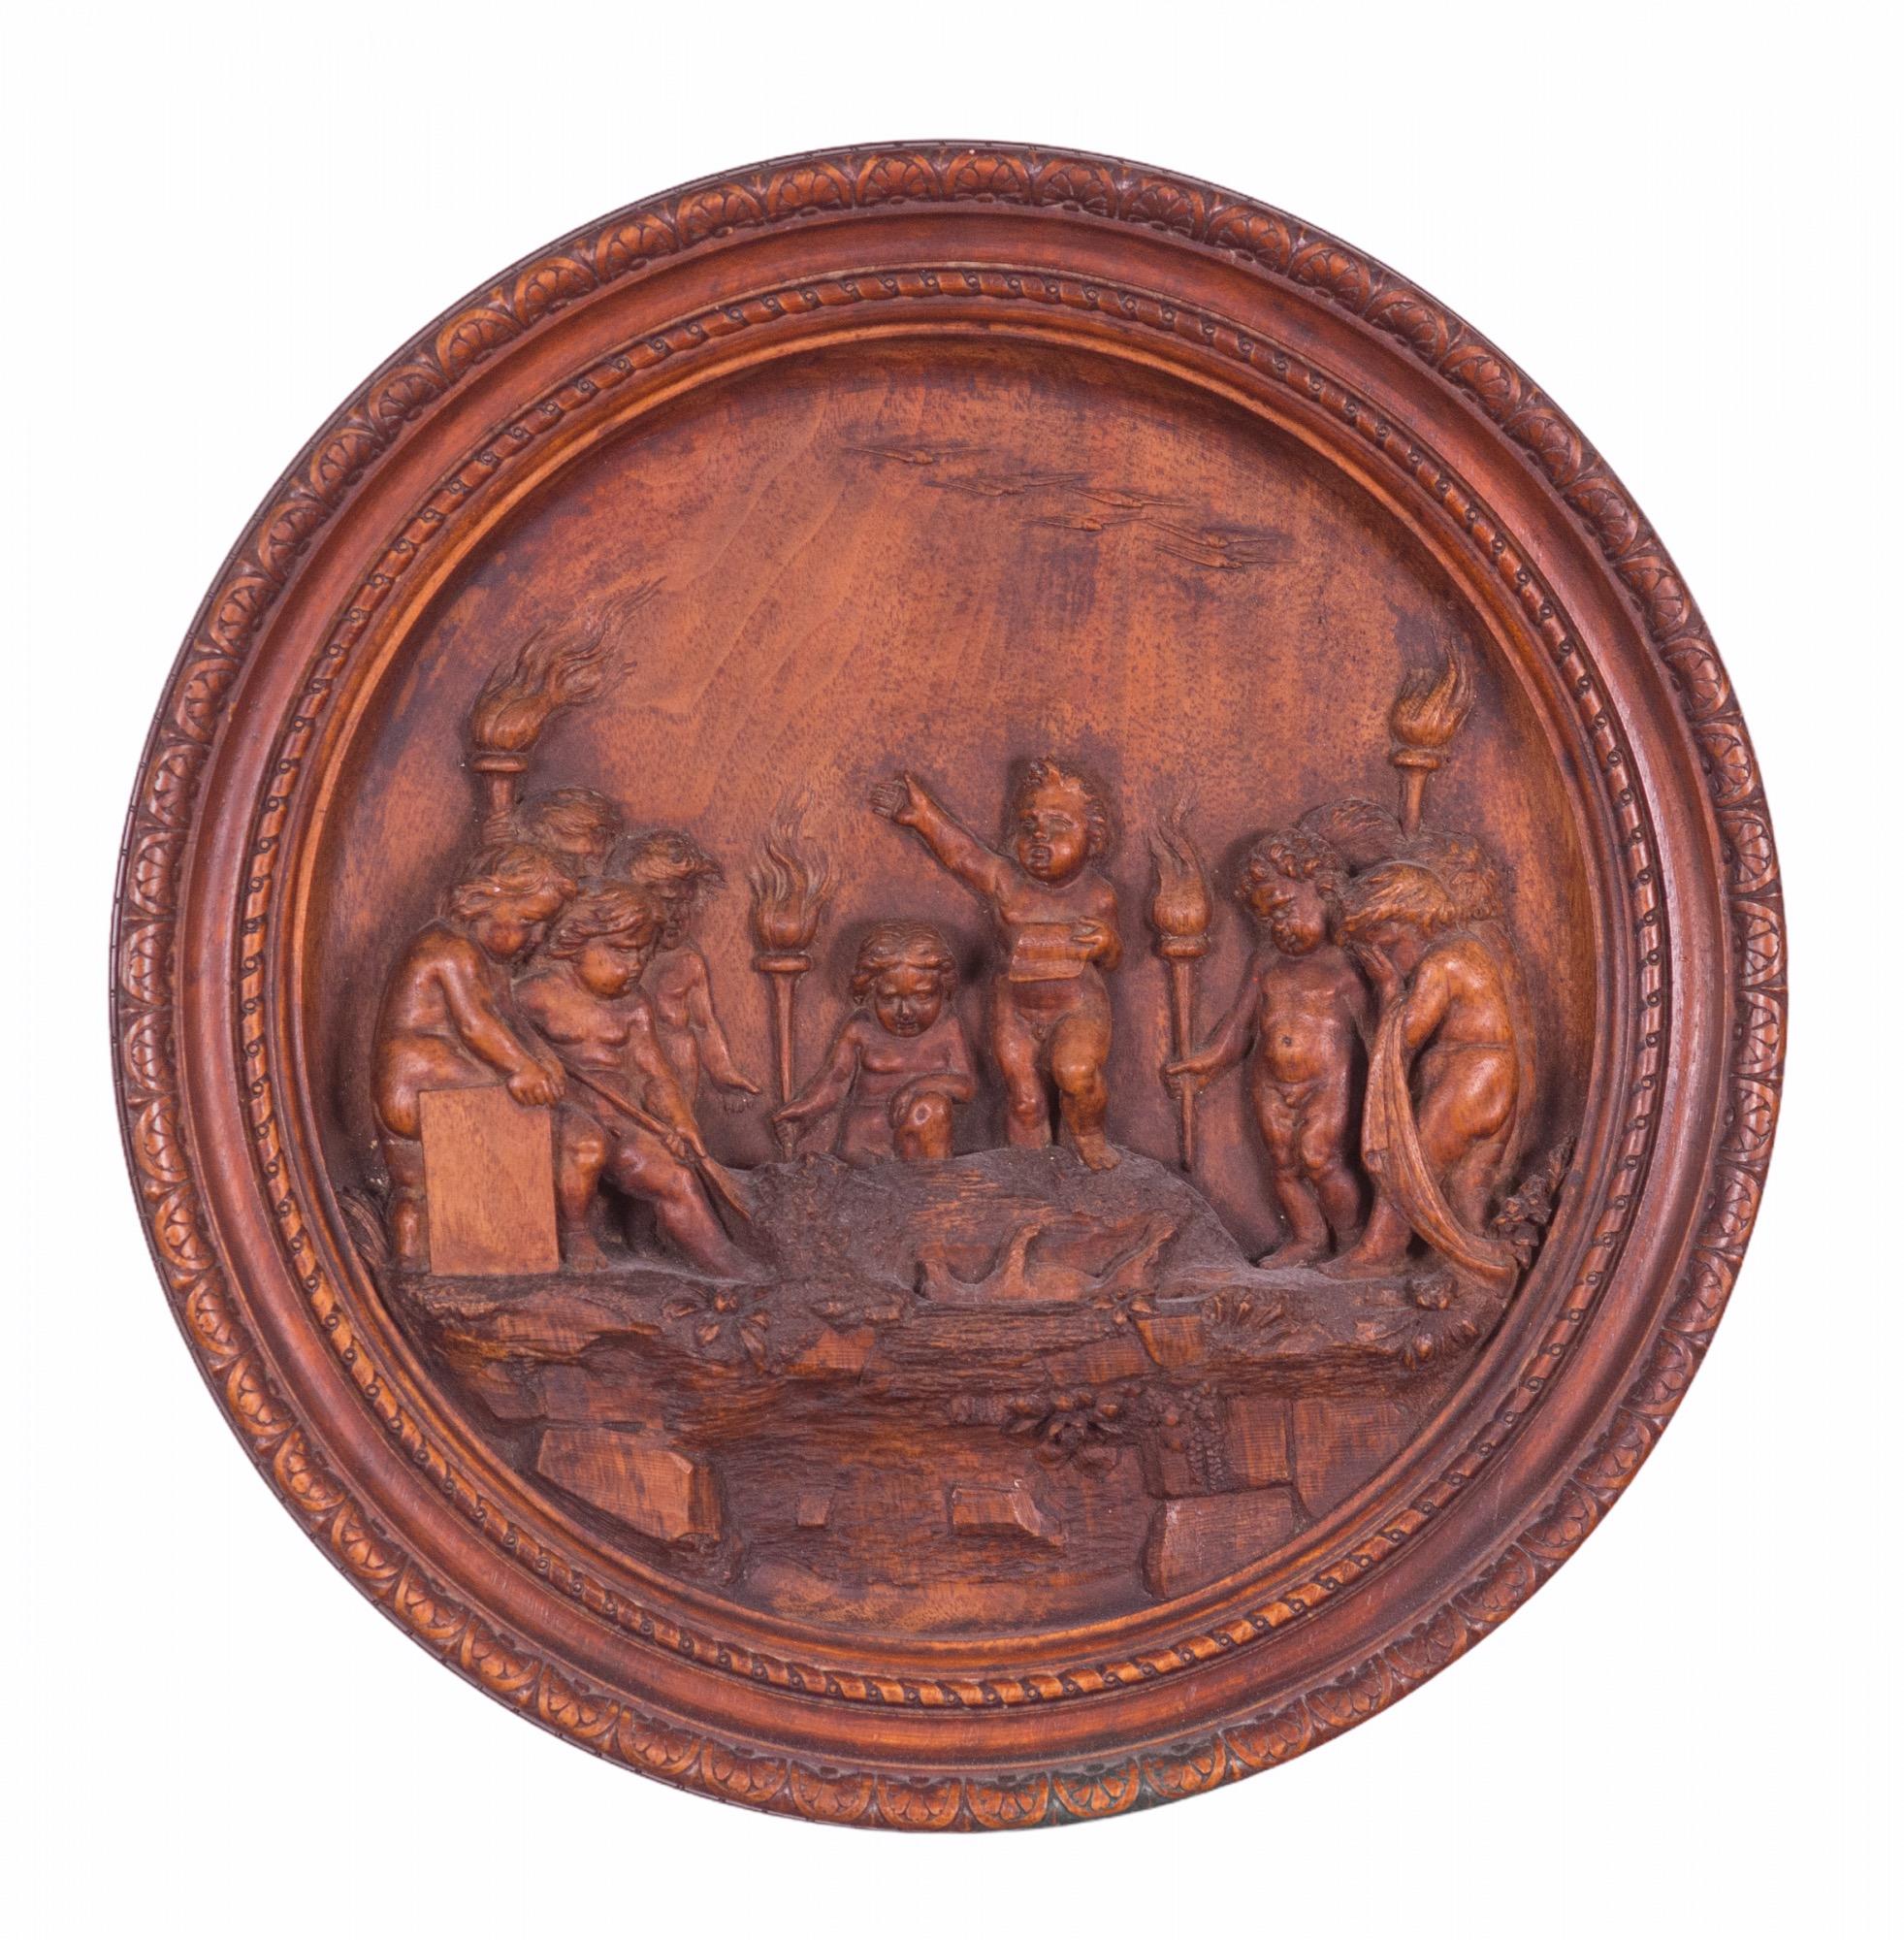 18th century French carved-wood panel of a scene of Cherubs burying their pet, expressing that God cares about all of creation, and since pets are part of that creation, they are included in His care and attention. The piece is mounted on a Lucite